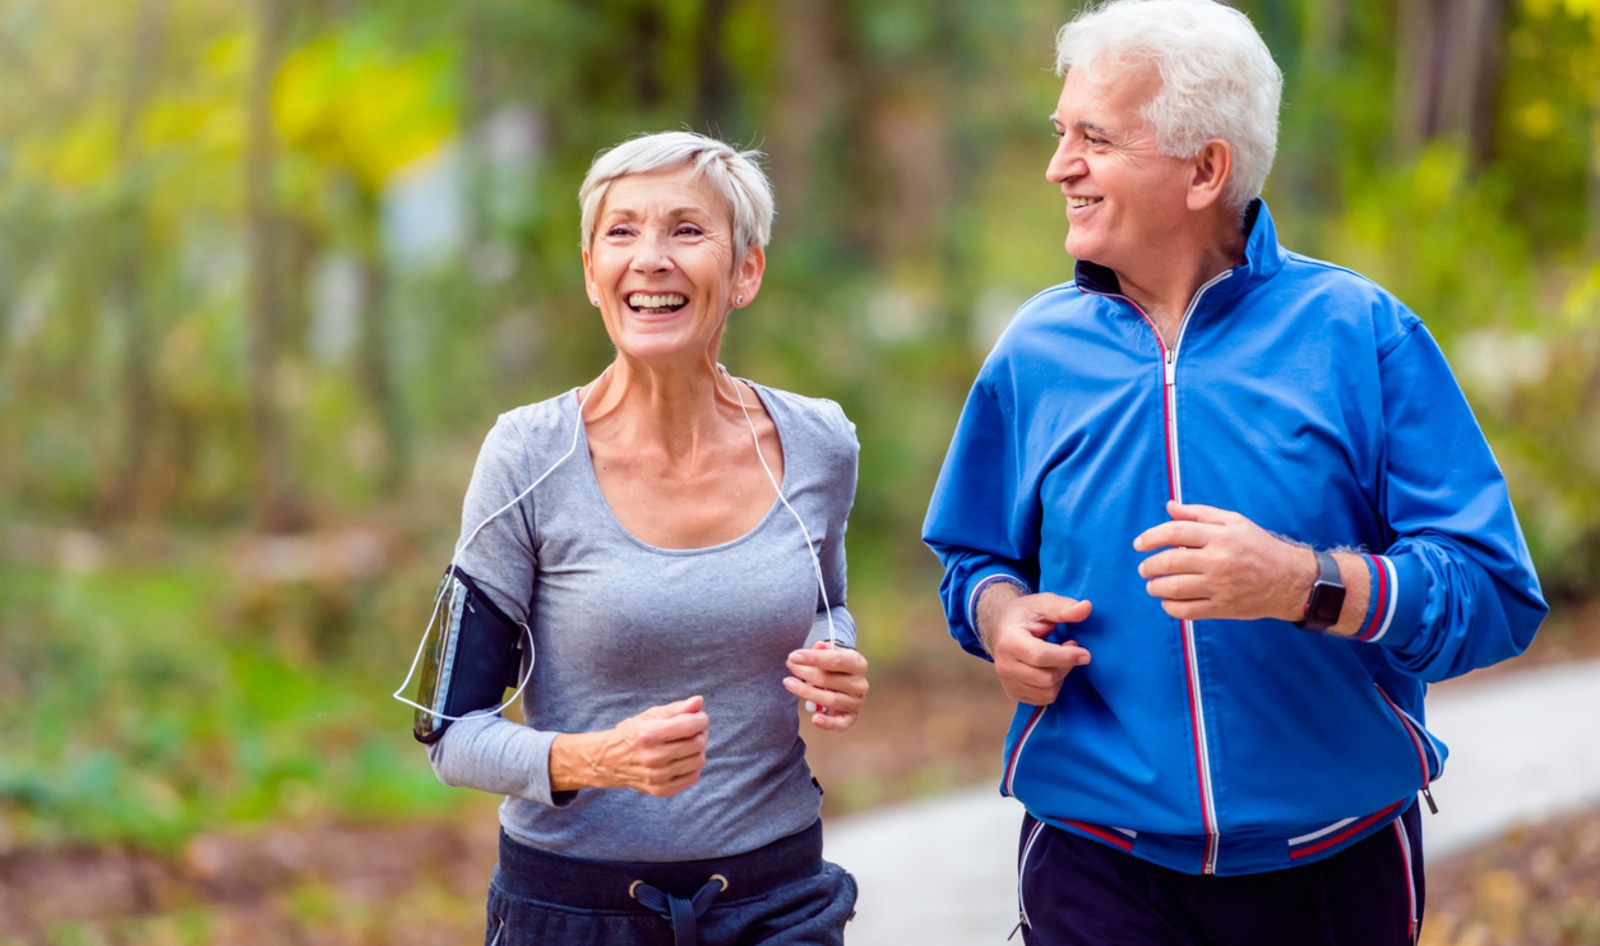 8 Ways for Vegan Seniors to Stay Fit and Active